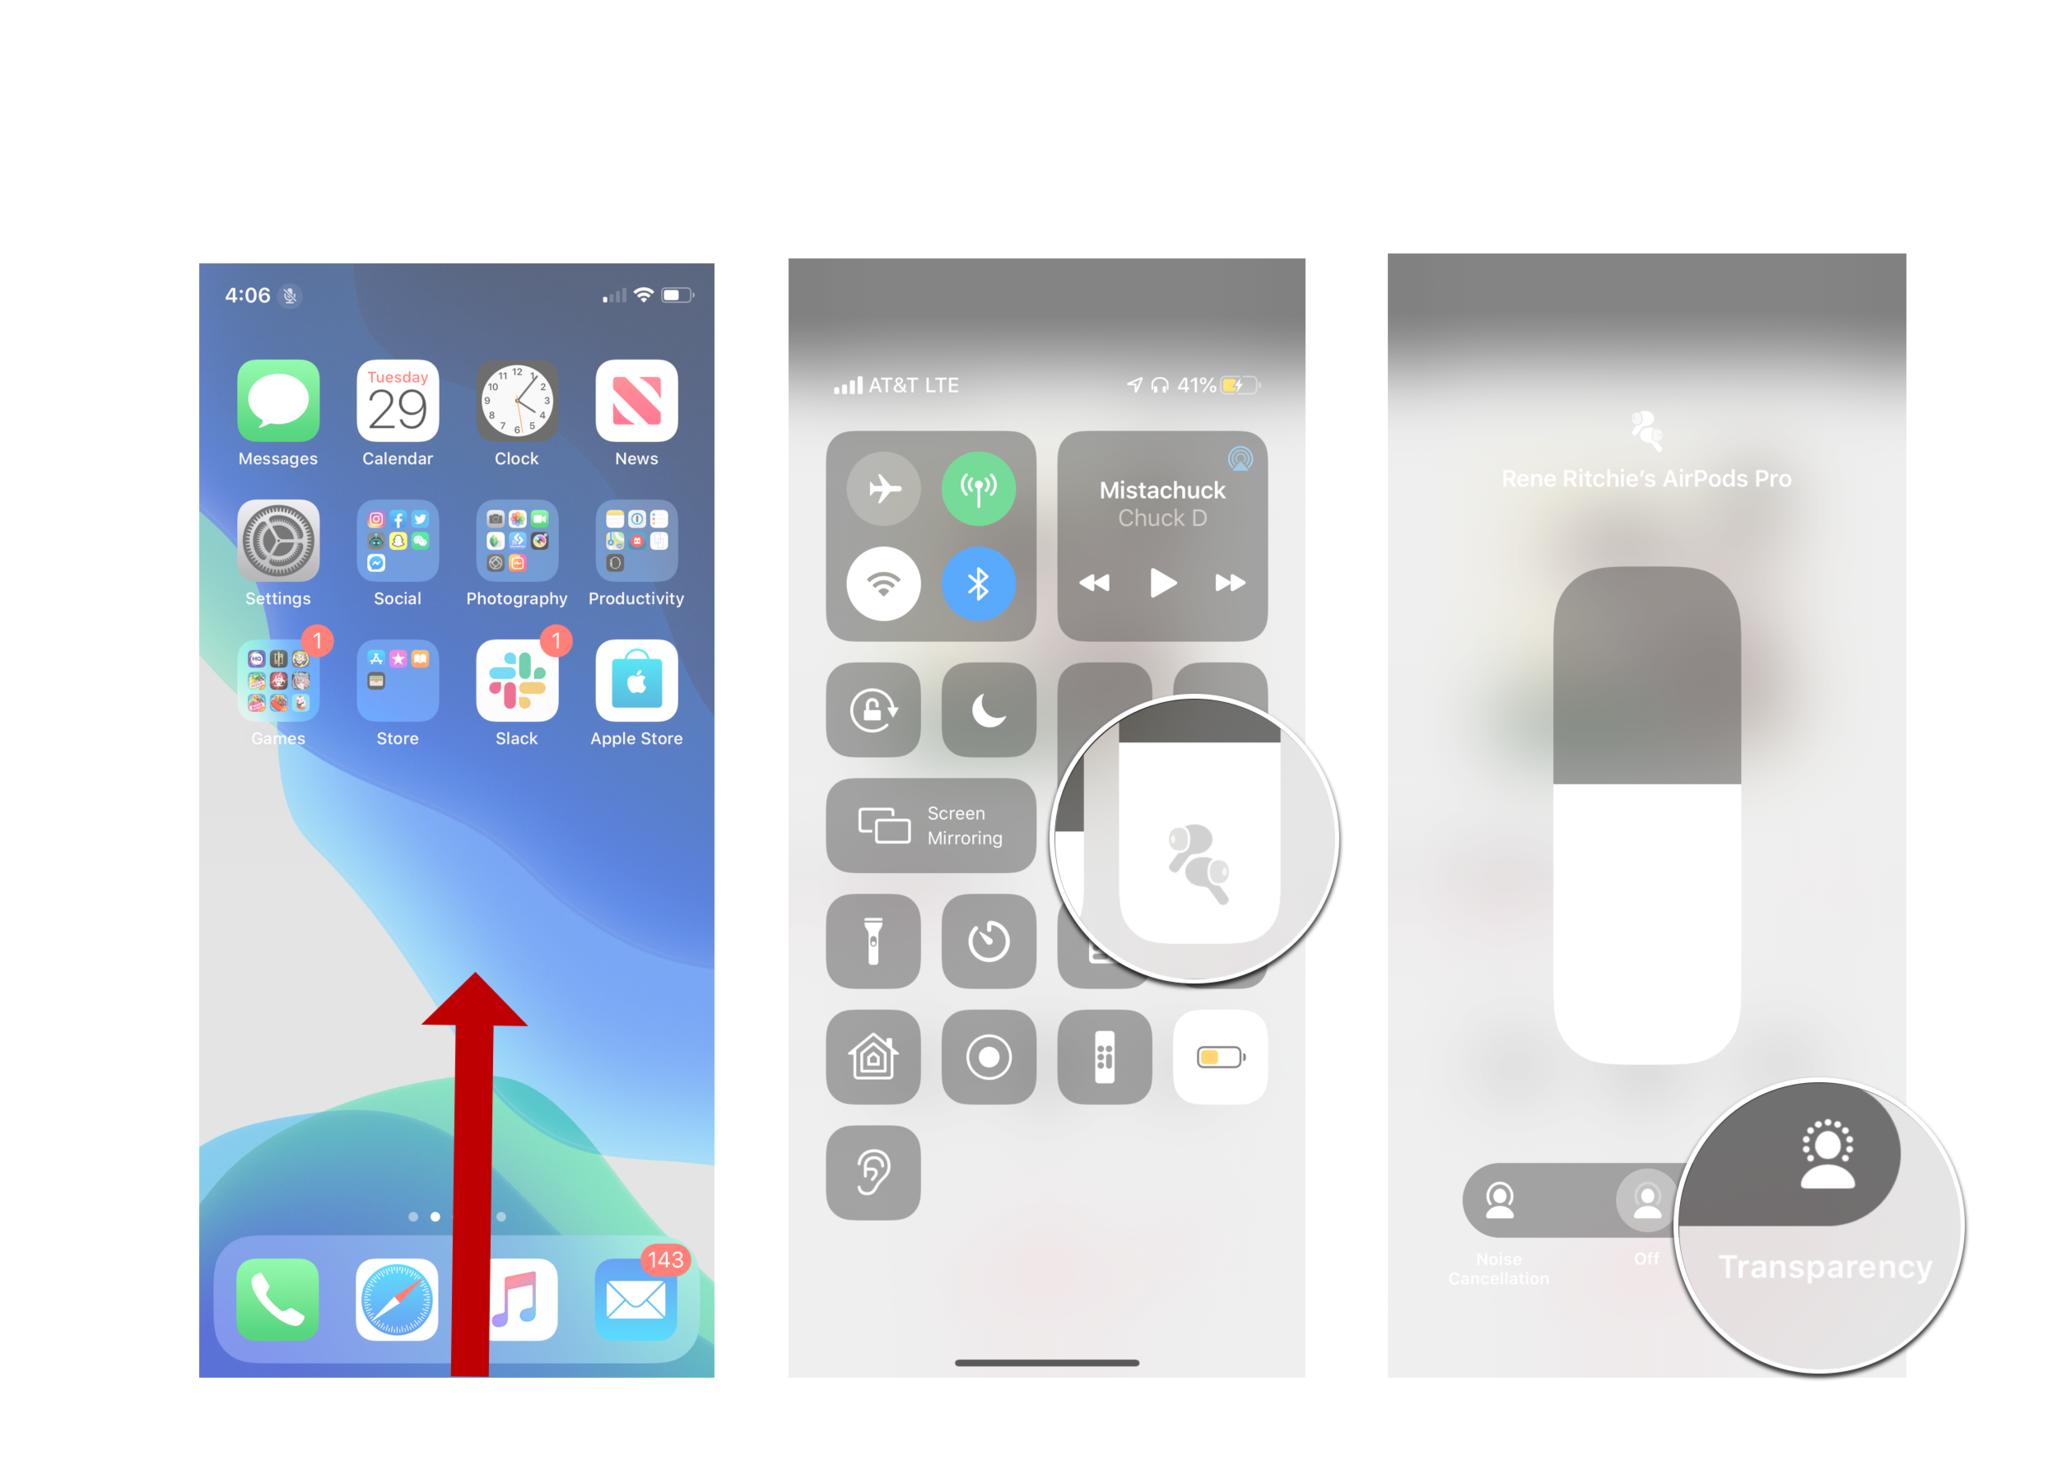 Open Control Center, tap volume slide and then tap transparency"